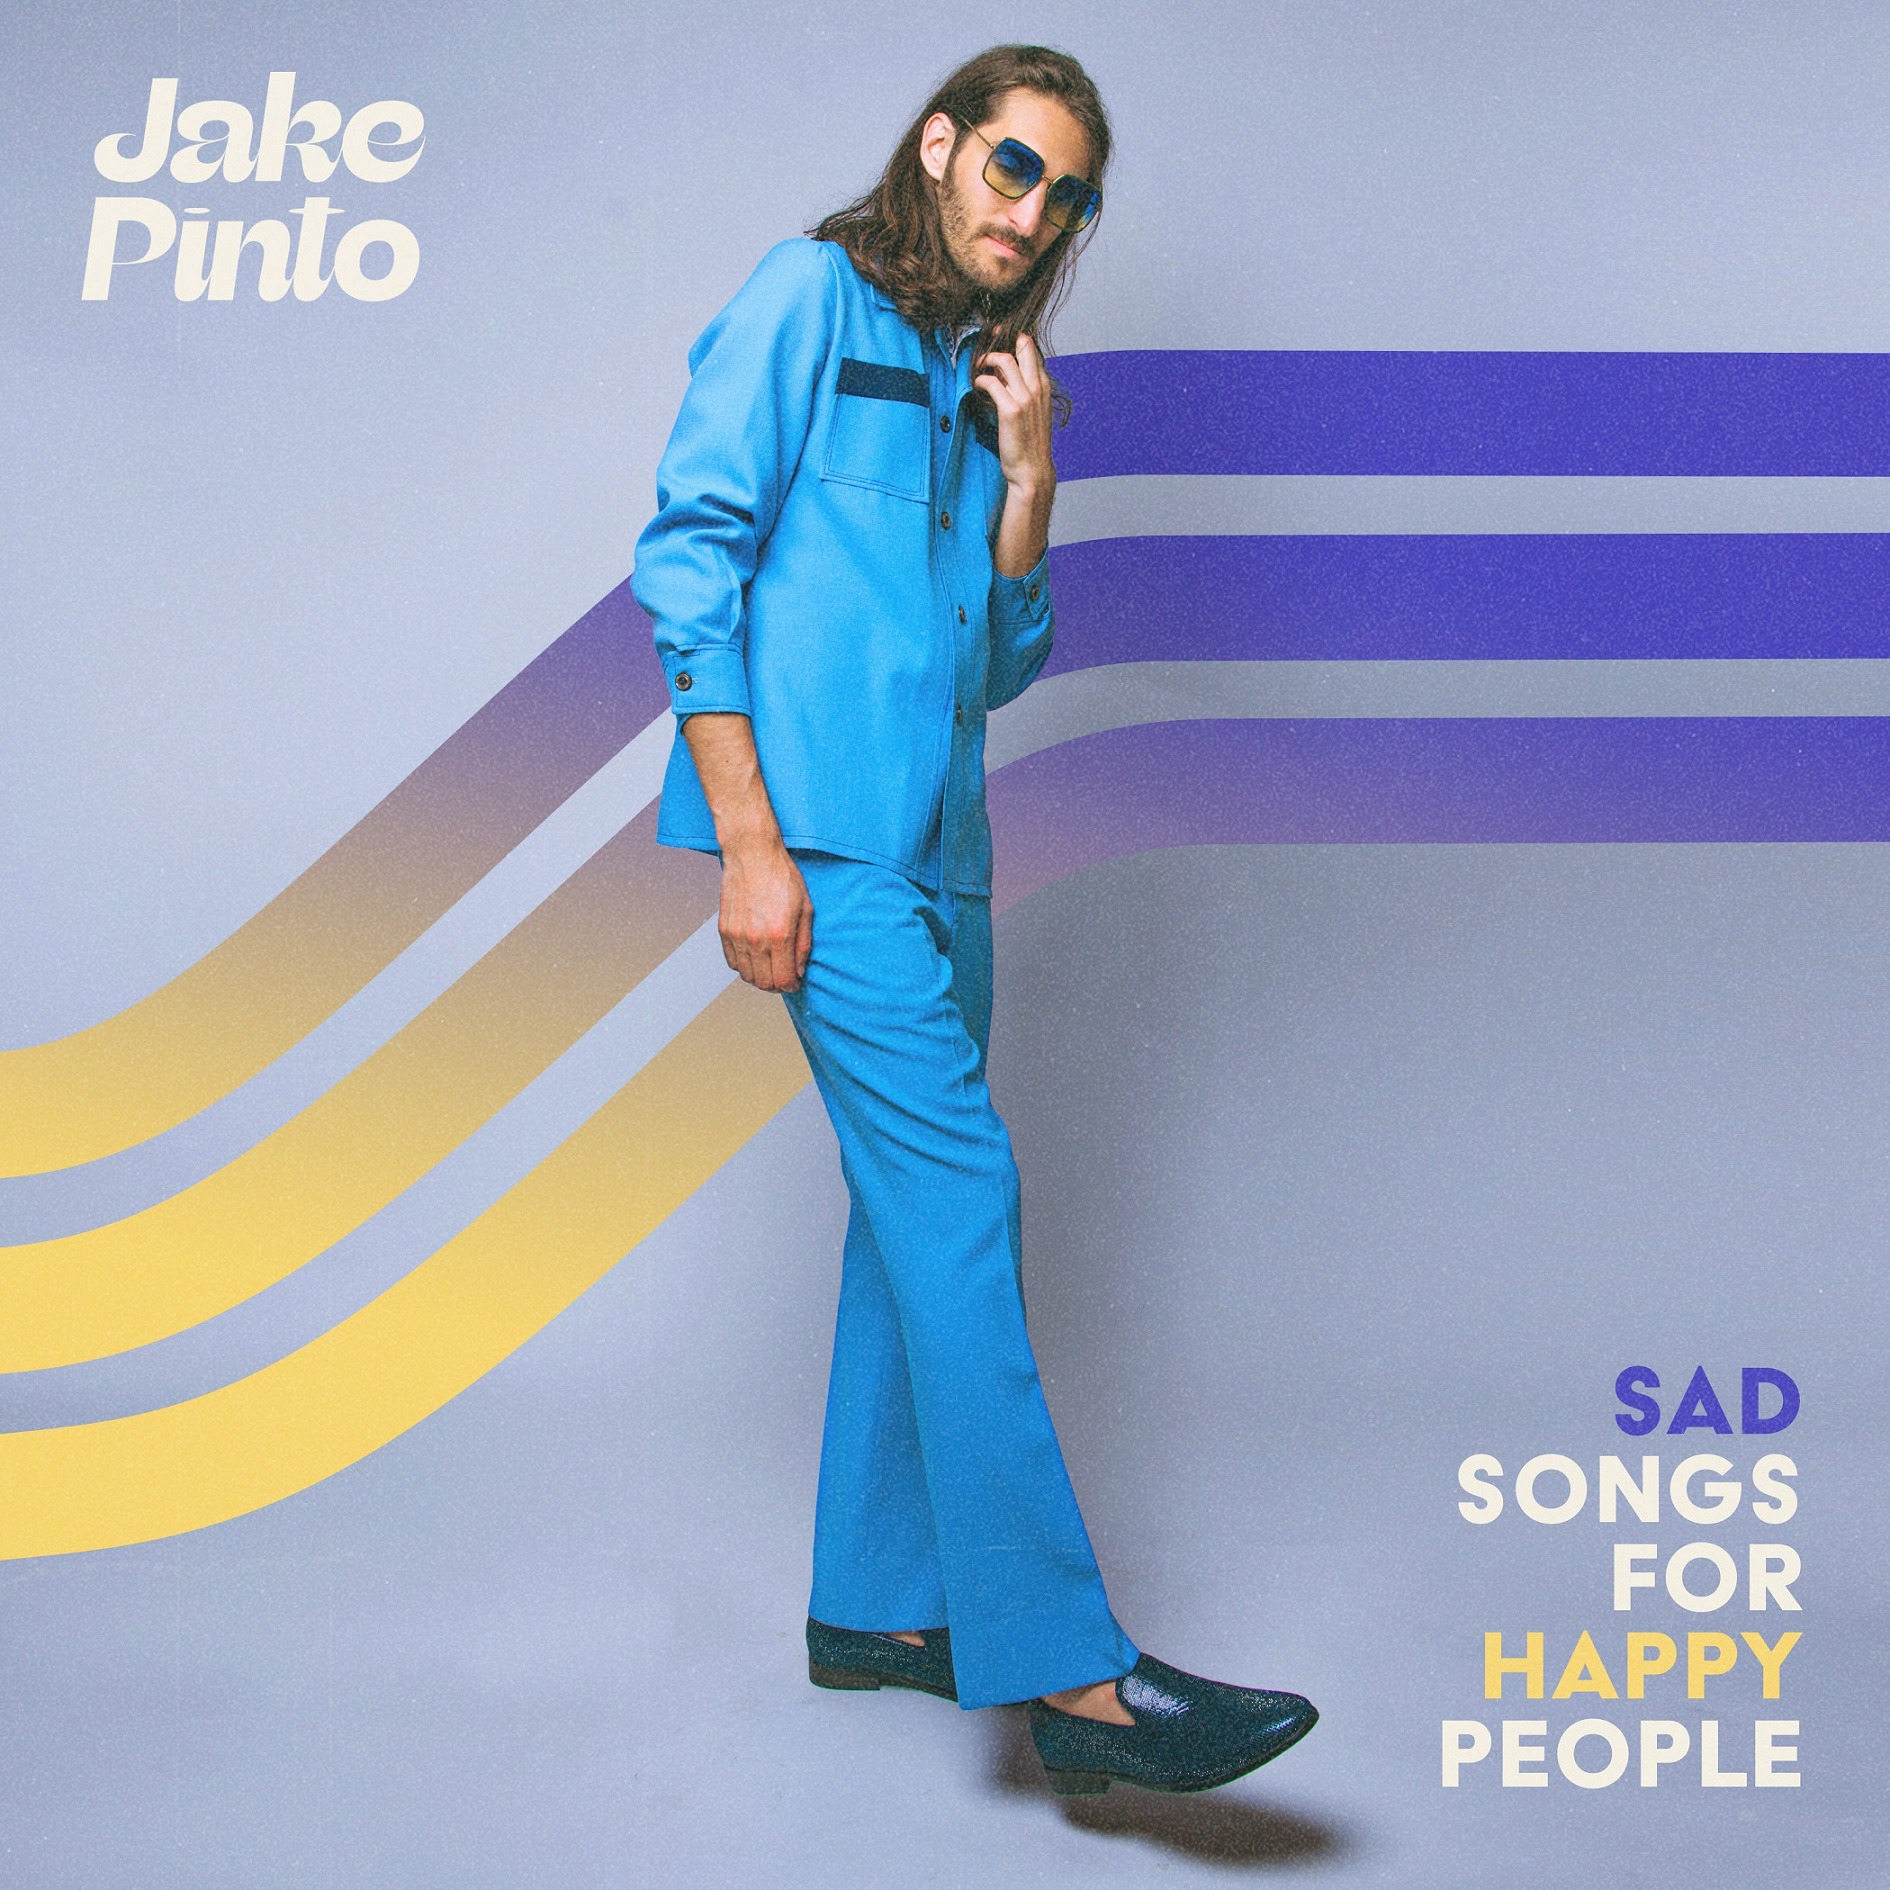 Jake Pinto to Release 'Sad Songs For Happy People" on March 31st